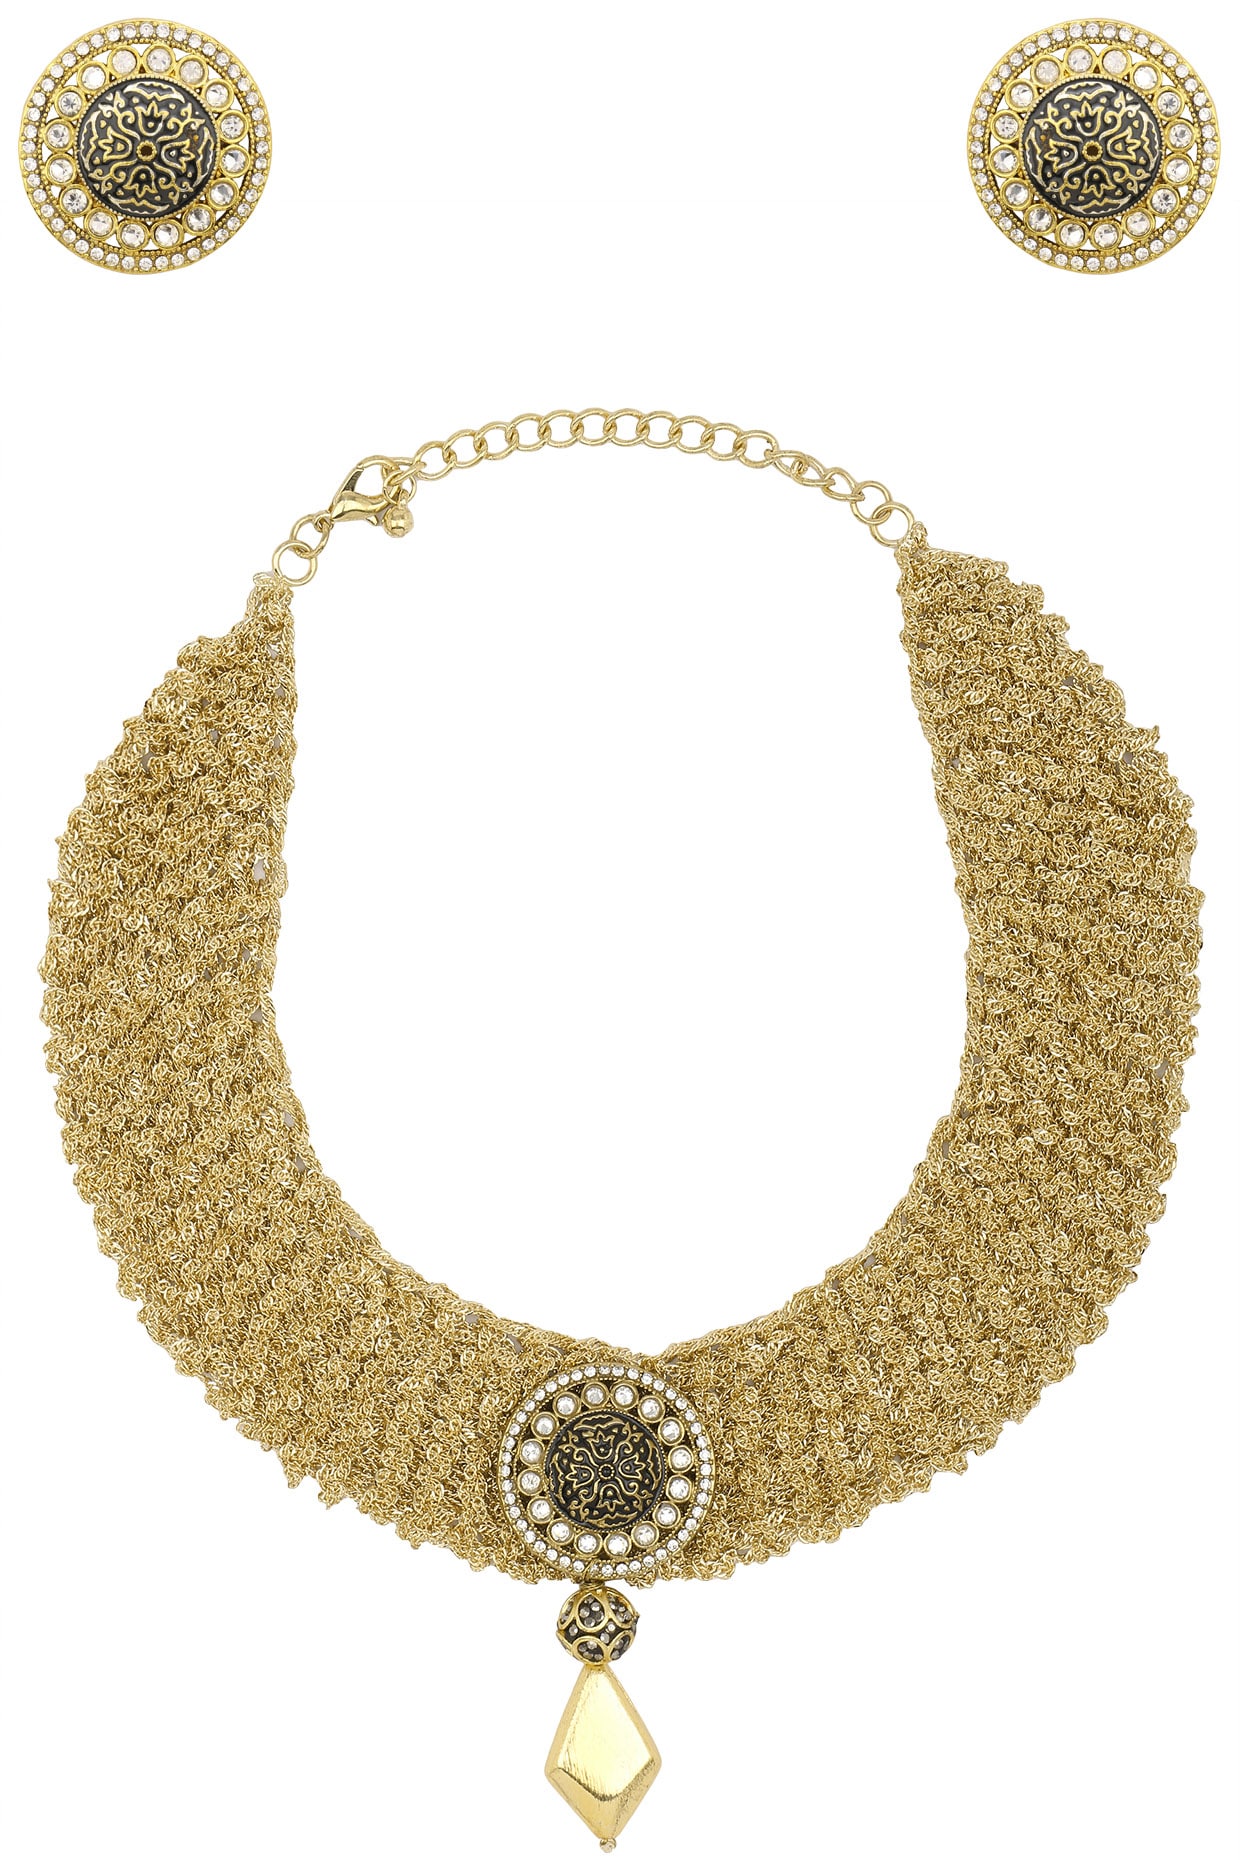 Buy Minimalist Gold Plated Necklace With Twisted Mesh Chain Online in India  - Etsy